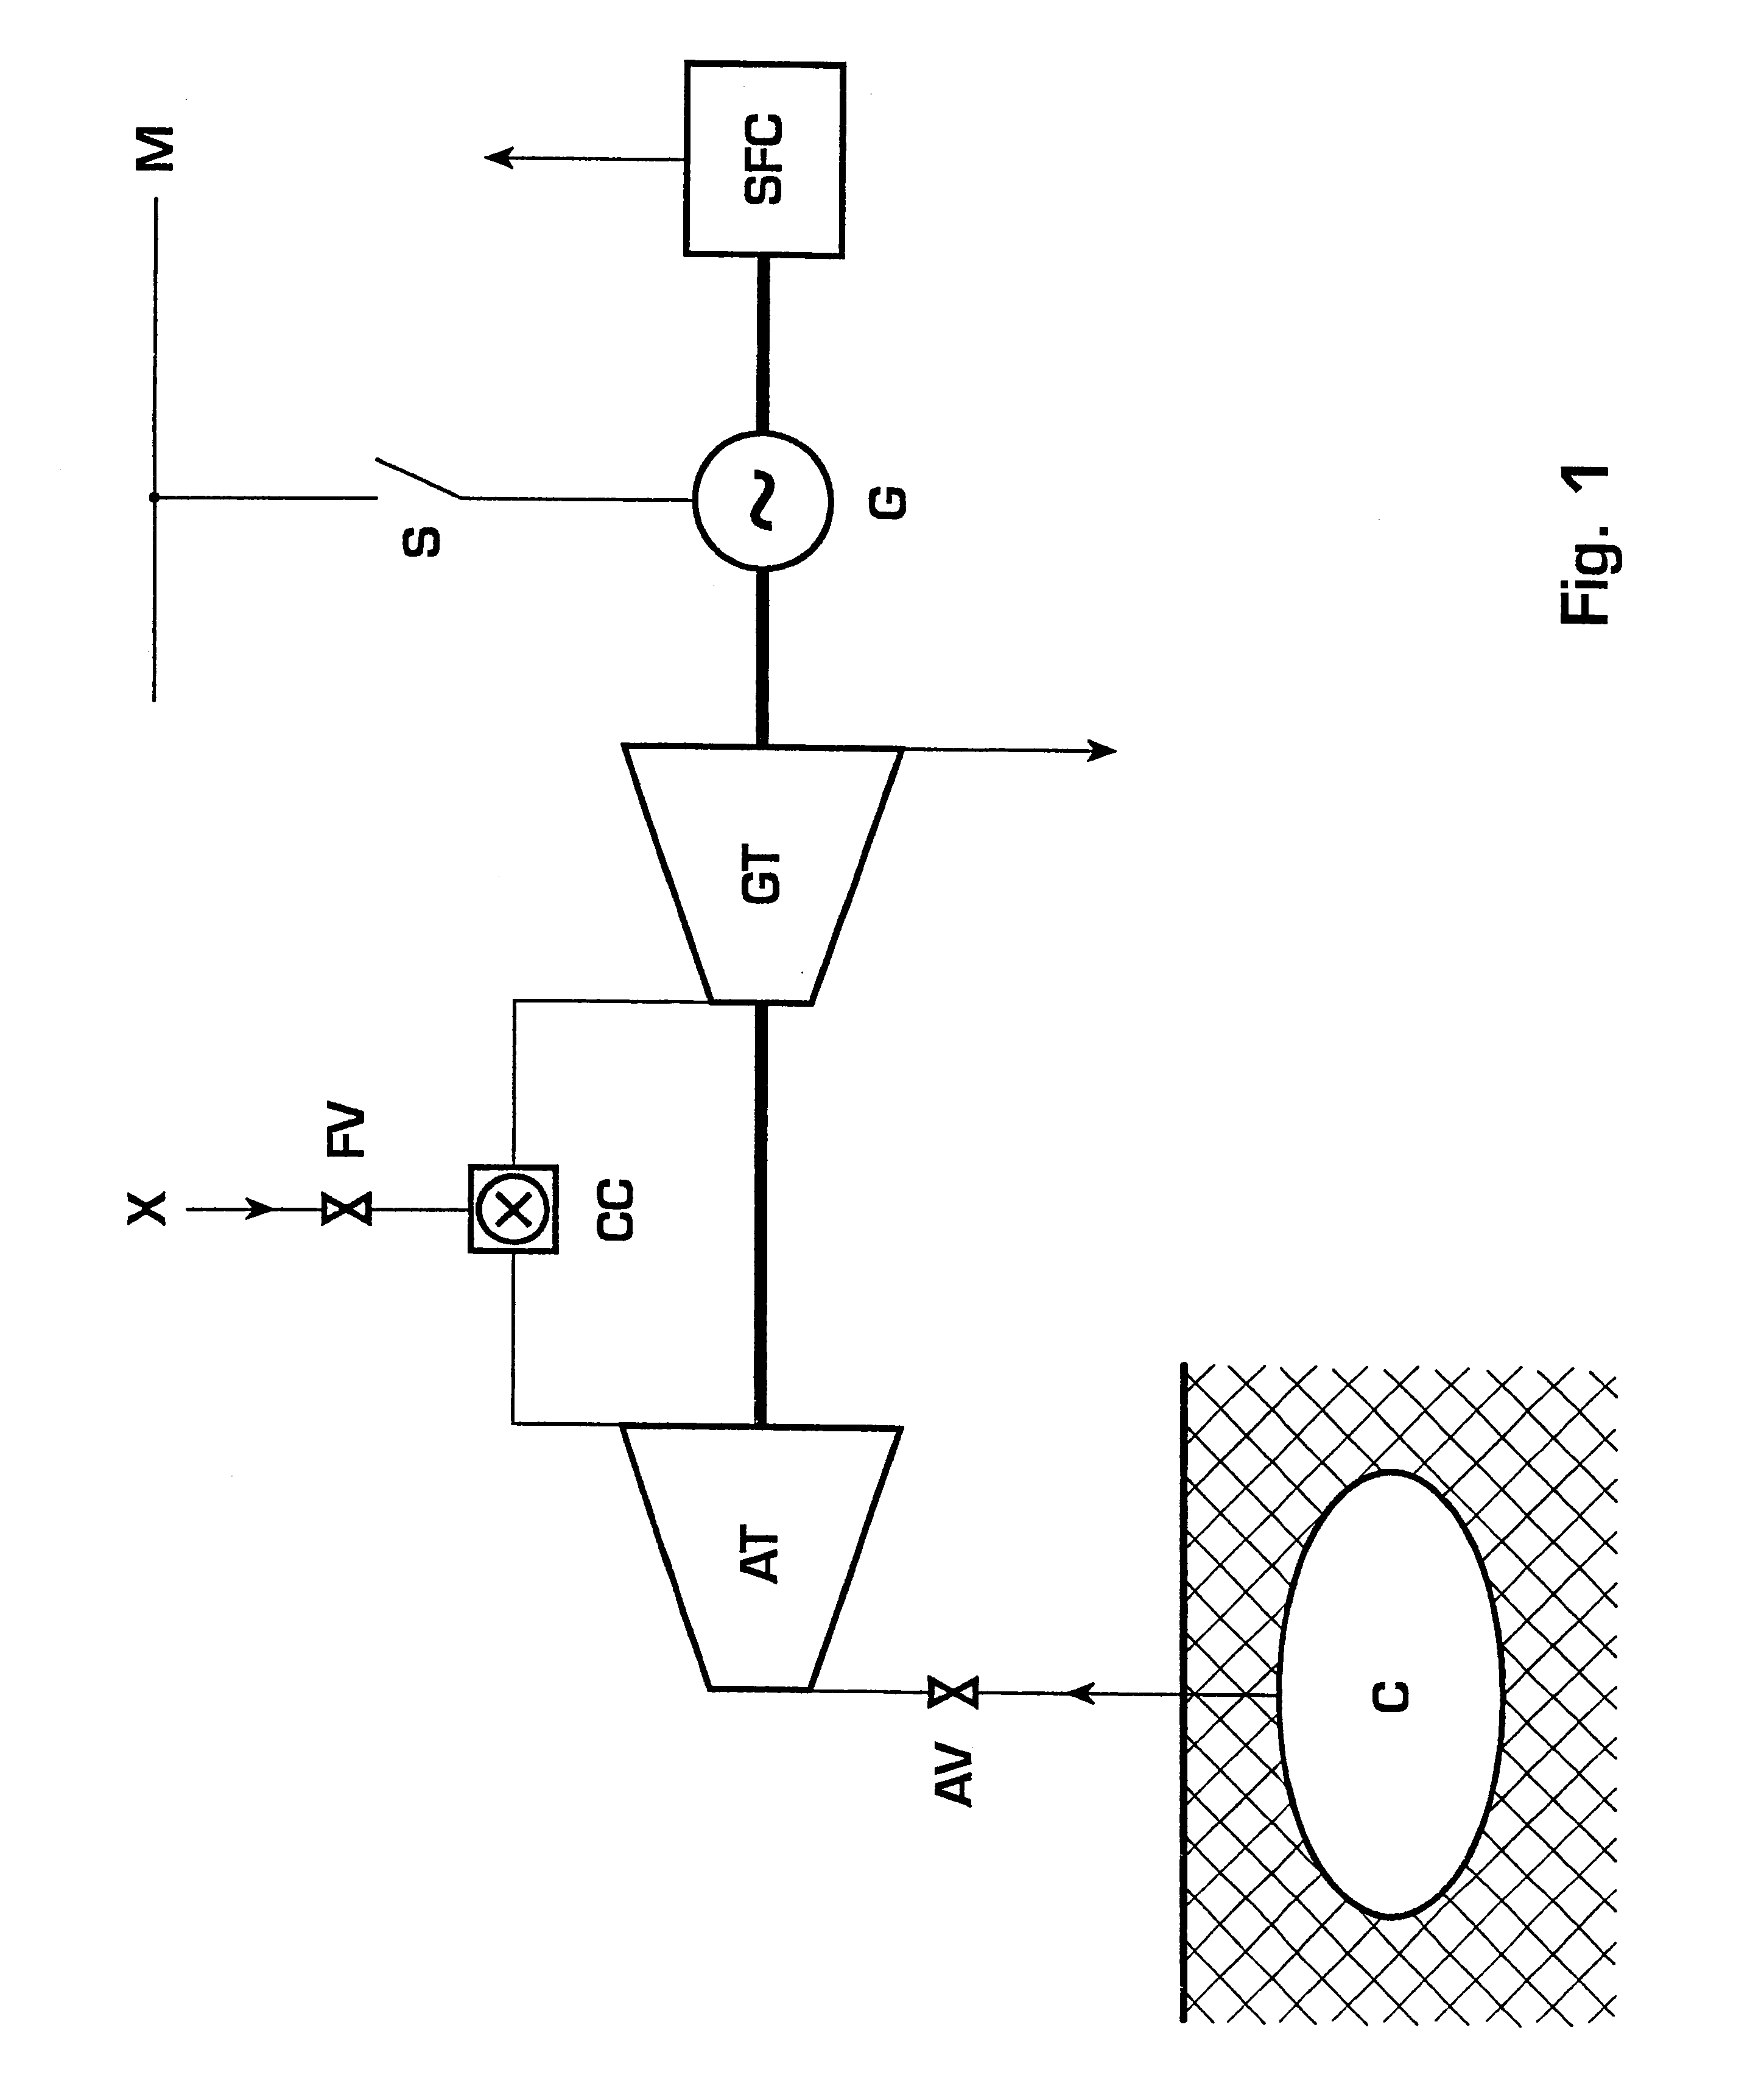 Method for operating a turbine